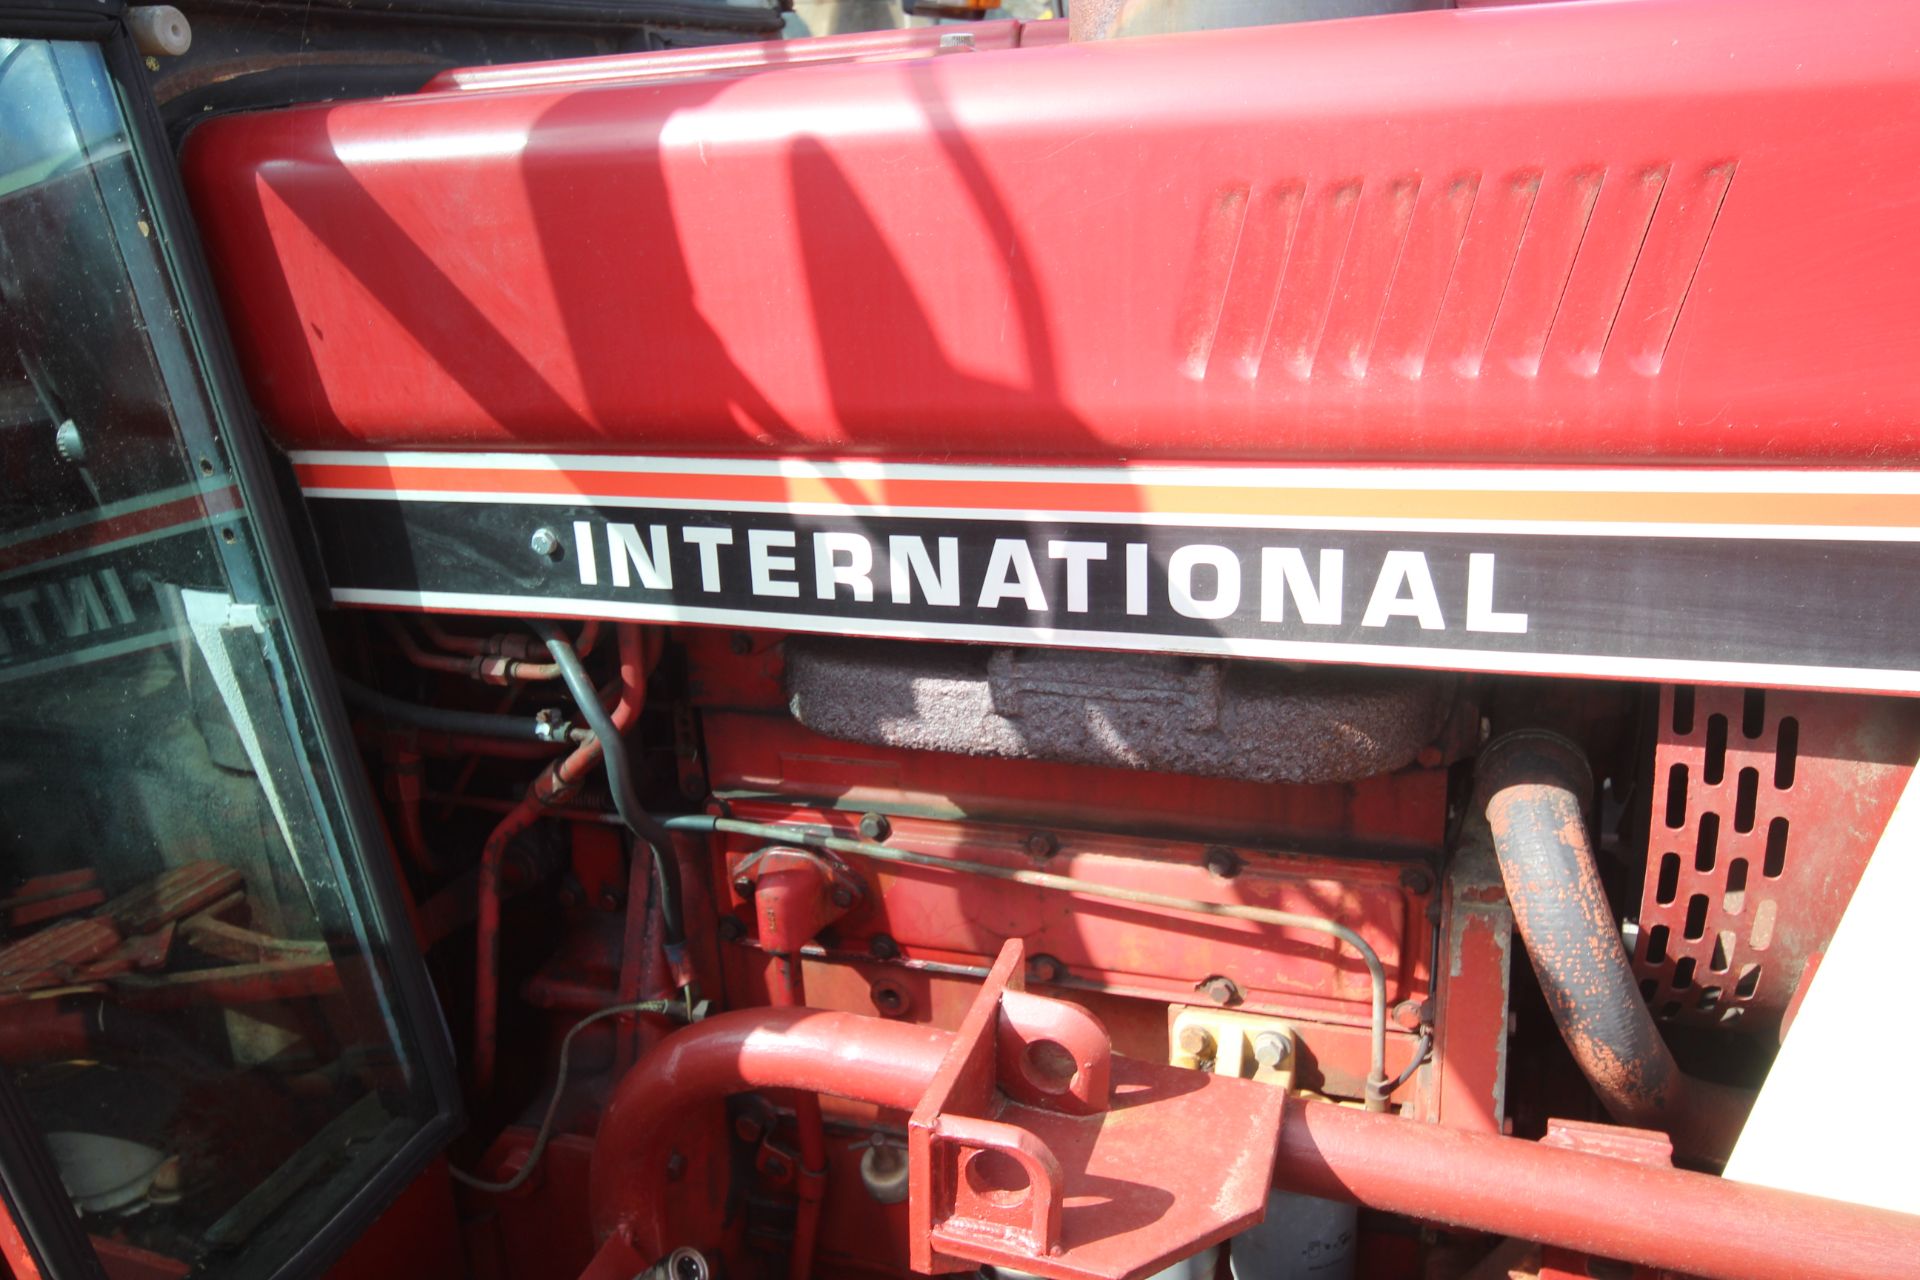 International Hydro 84 2WD tractor. Registration RGV 594W. Date of first registration 19/03/1981. - Image 12 of 62